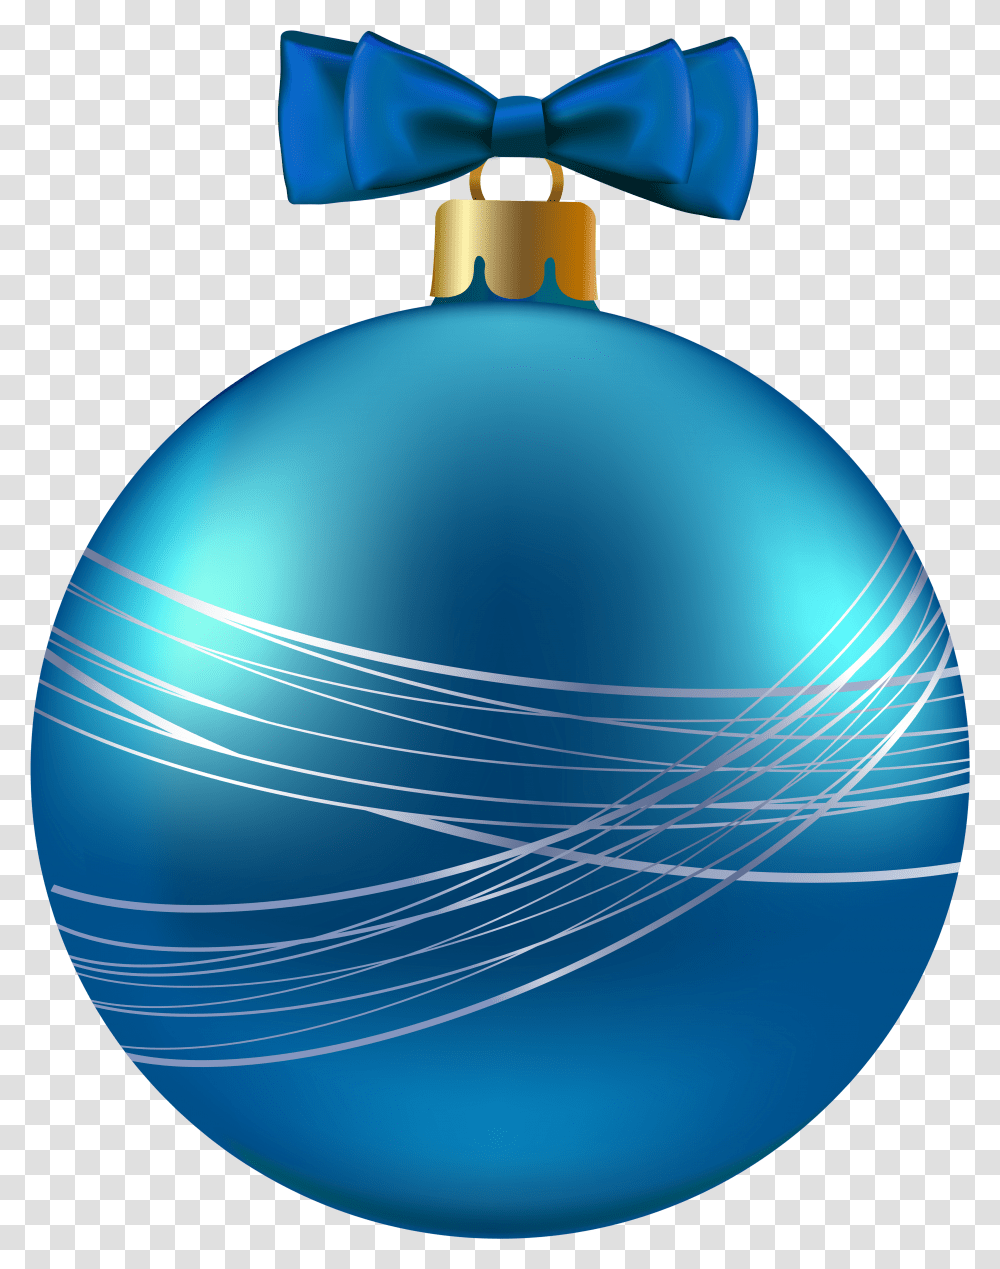 Library Of Christmas Ornaments Image Blue Christmas Ornaments Transparent Png